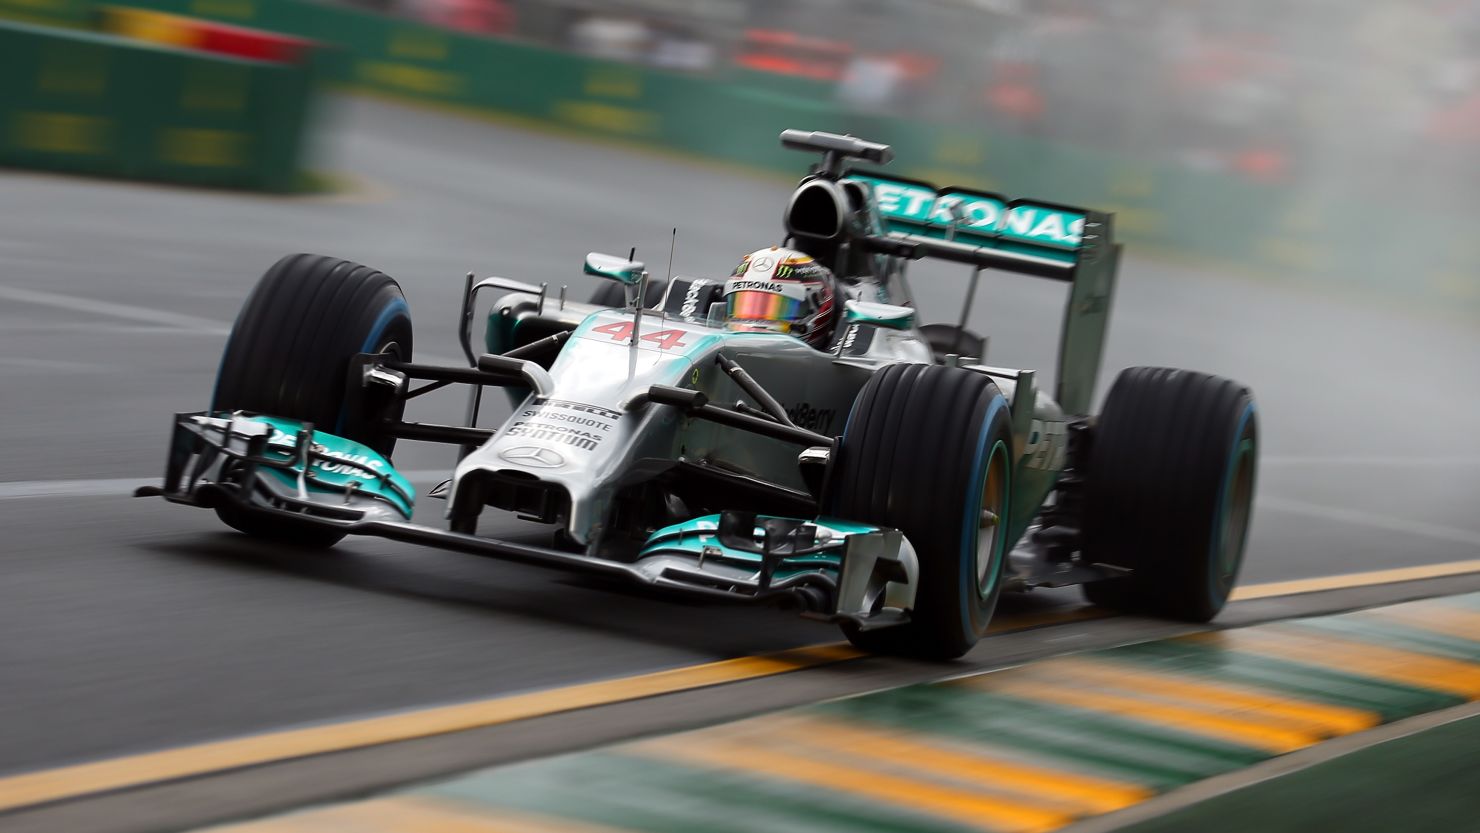 Mercedes driver Lewis Hamilton followed up his hot practice form by qualifying fastest in the wet conditions at Albert Park.